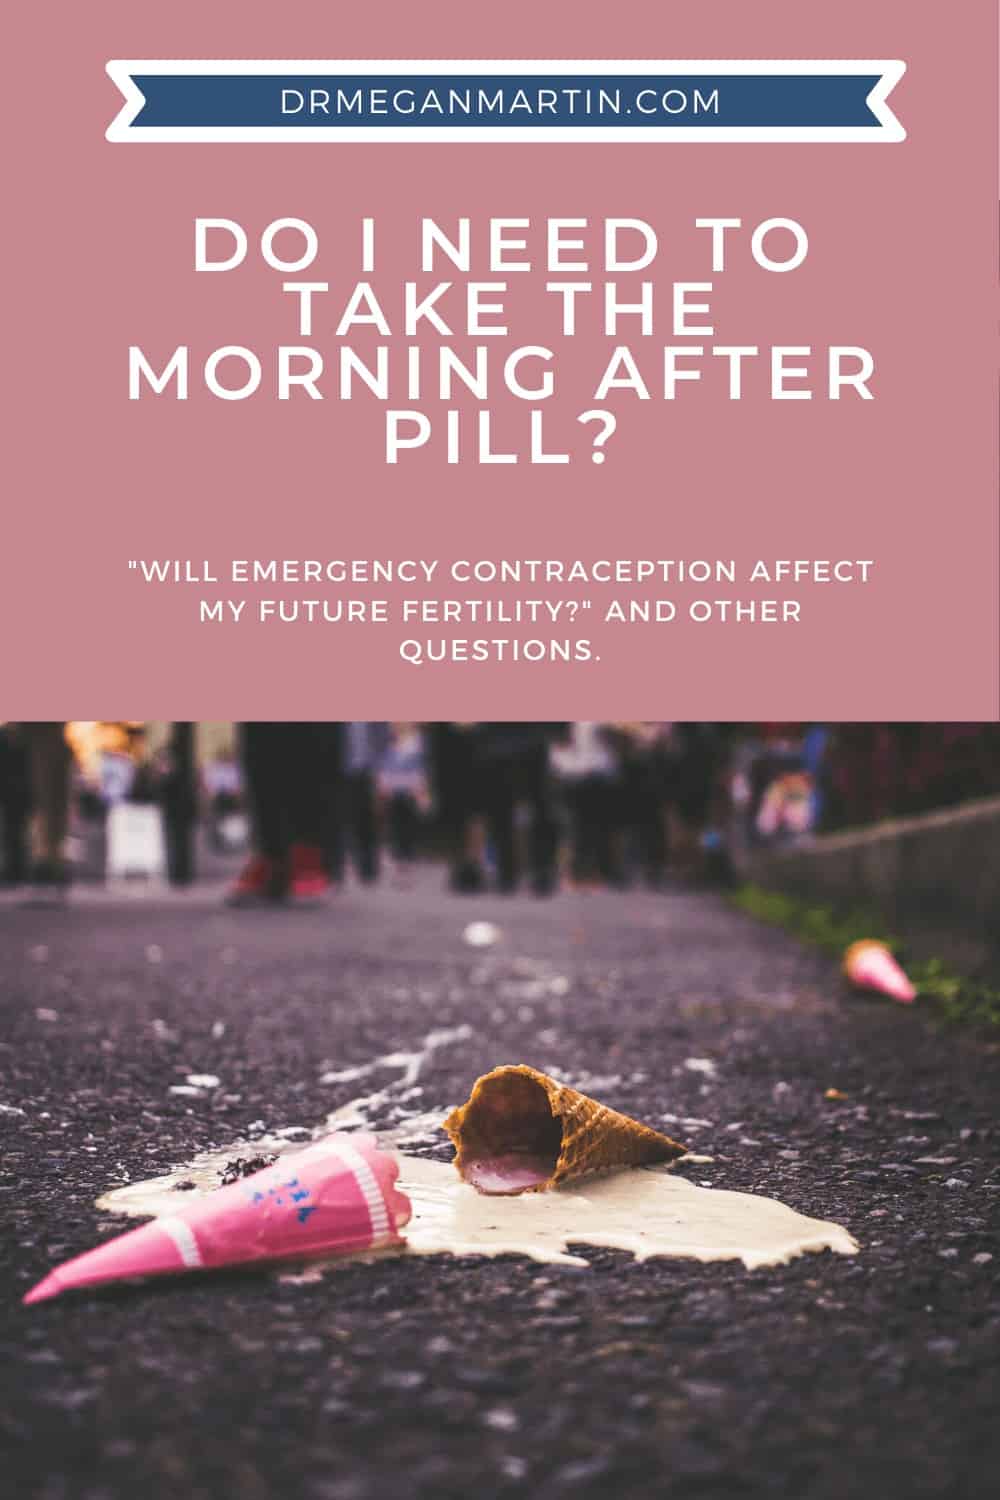 Do I need to take emergency contraception?